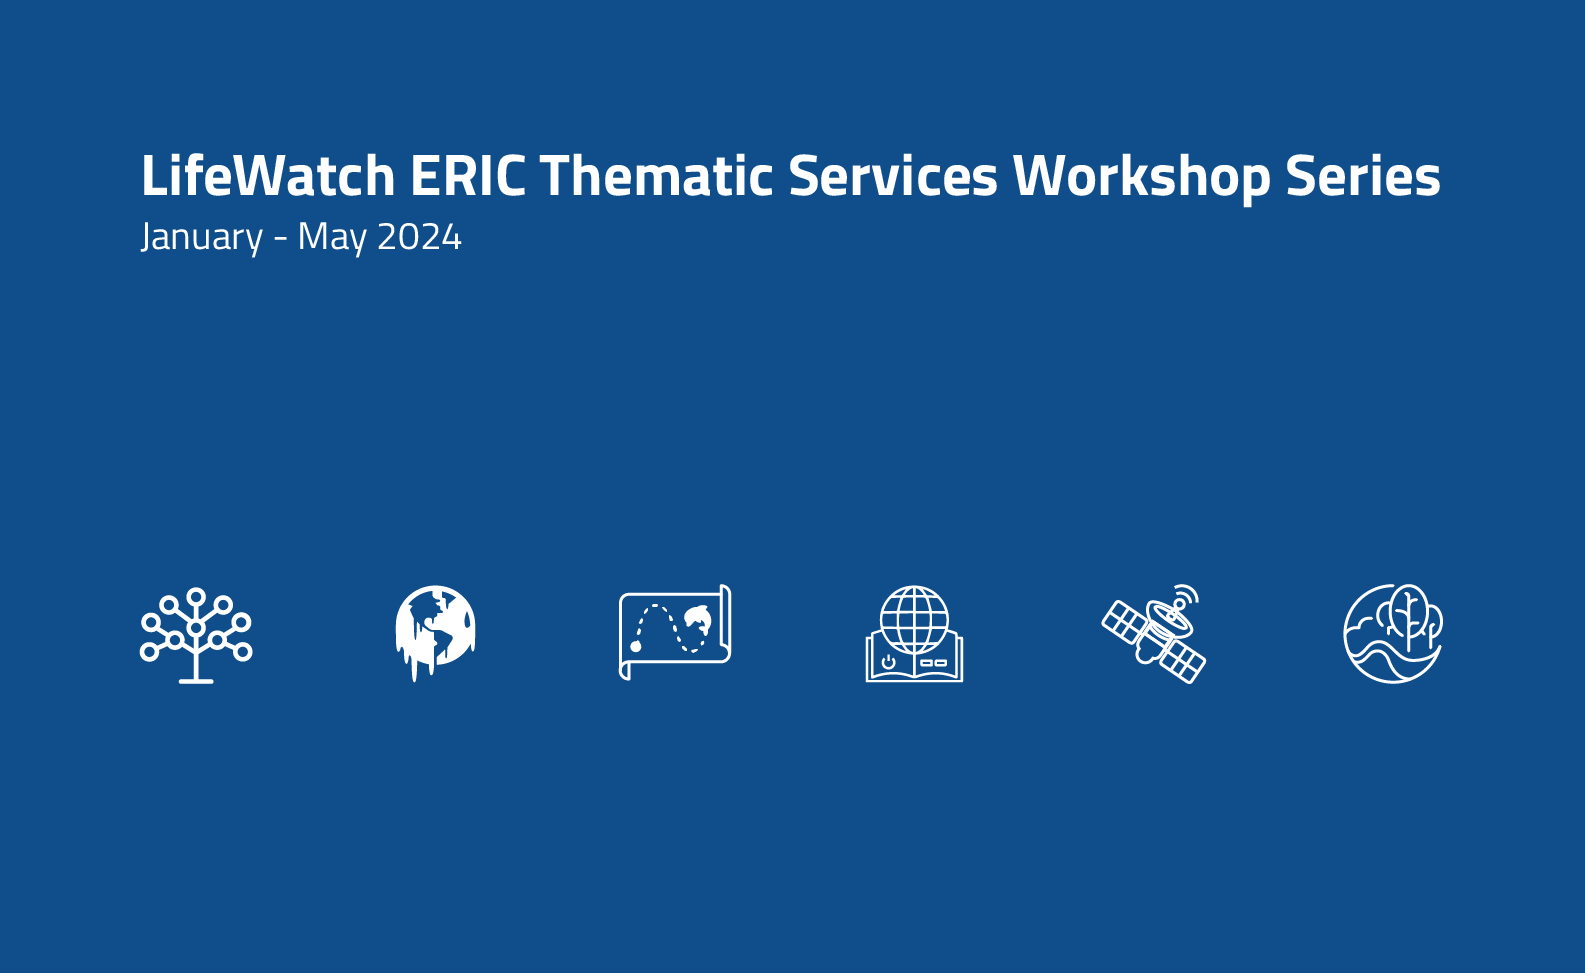 LifeWatch ERIC Thematic Service Workshops